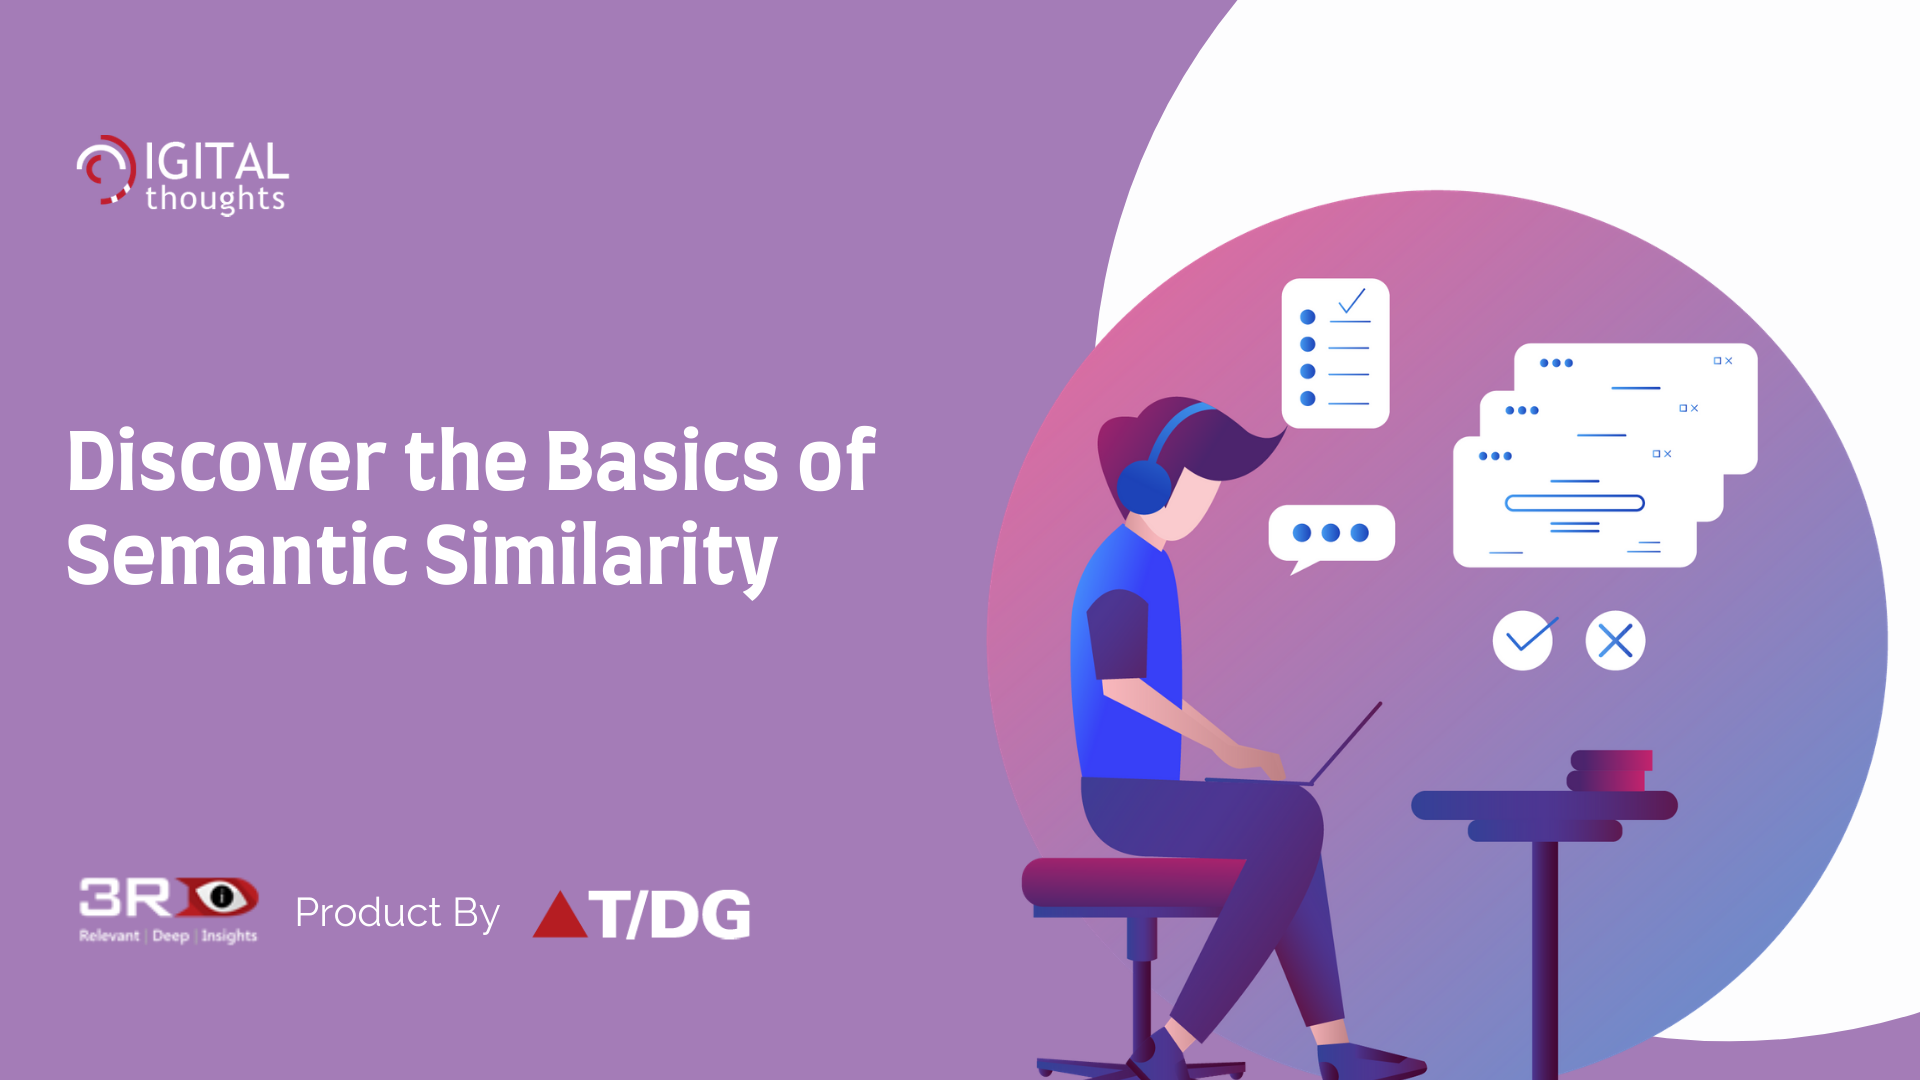 A Brief Introduction to Semantic Similarity